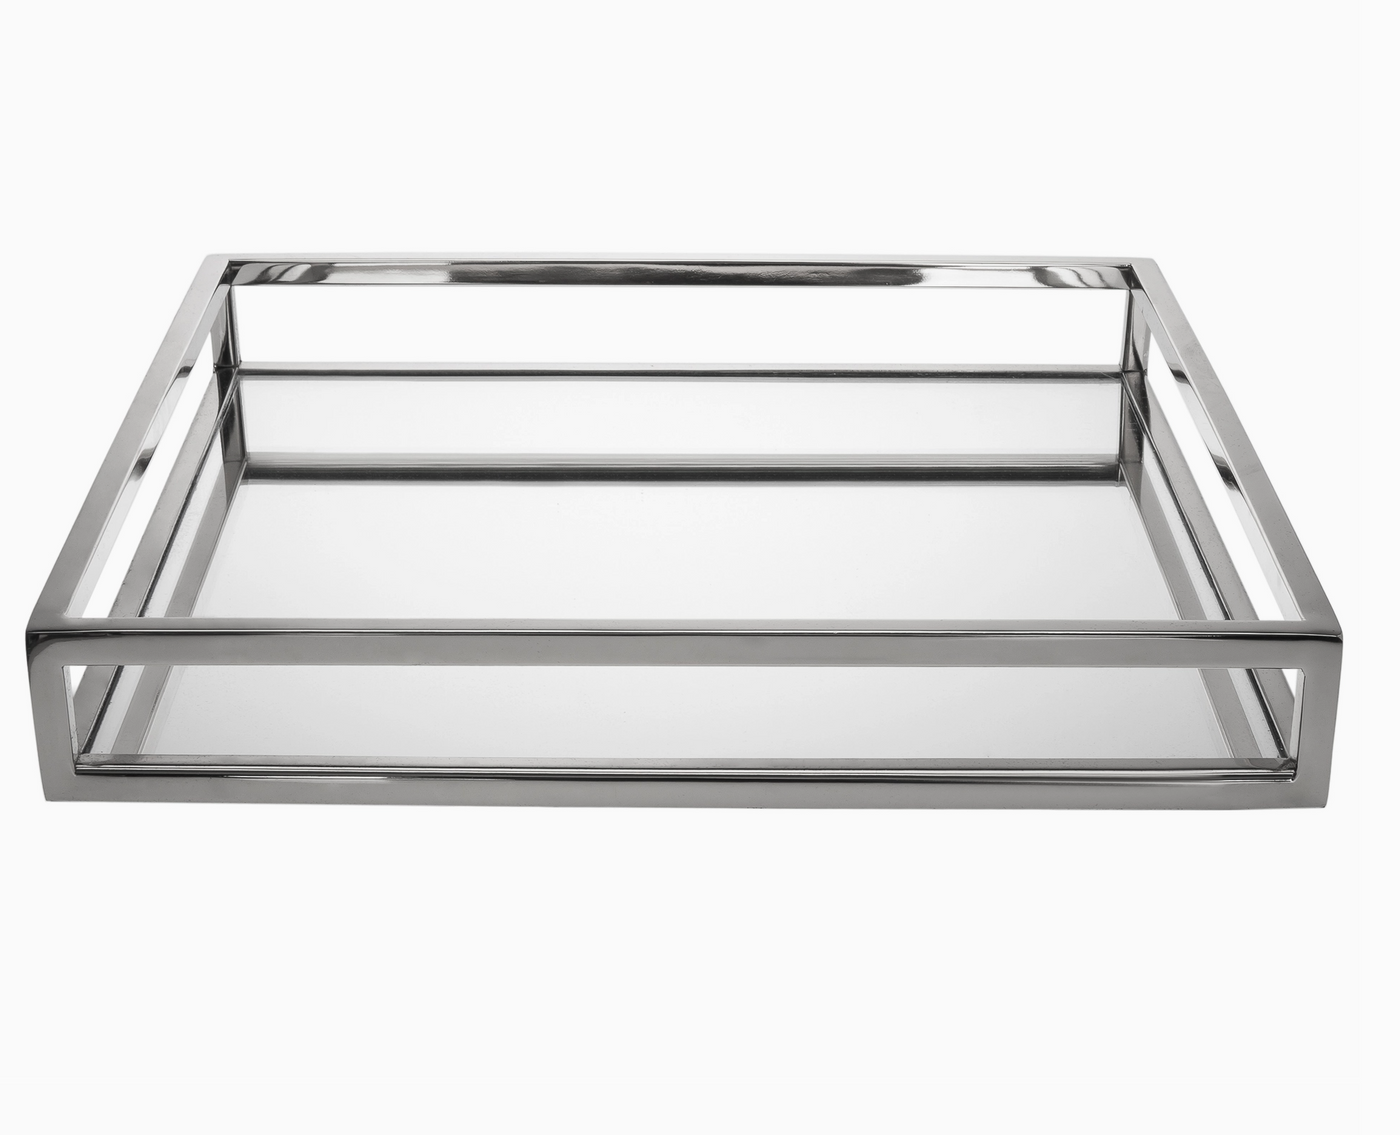 TRAY NICKLE SQUARE (AVAILABLE IN 2 SIZES)